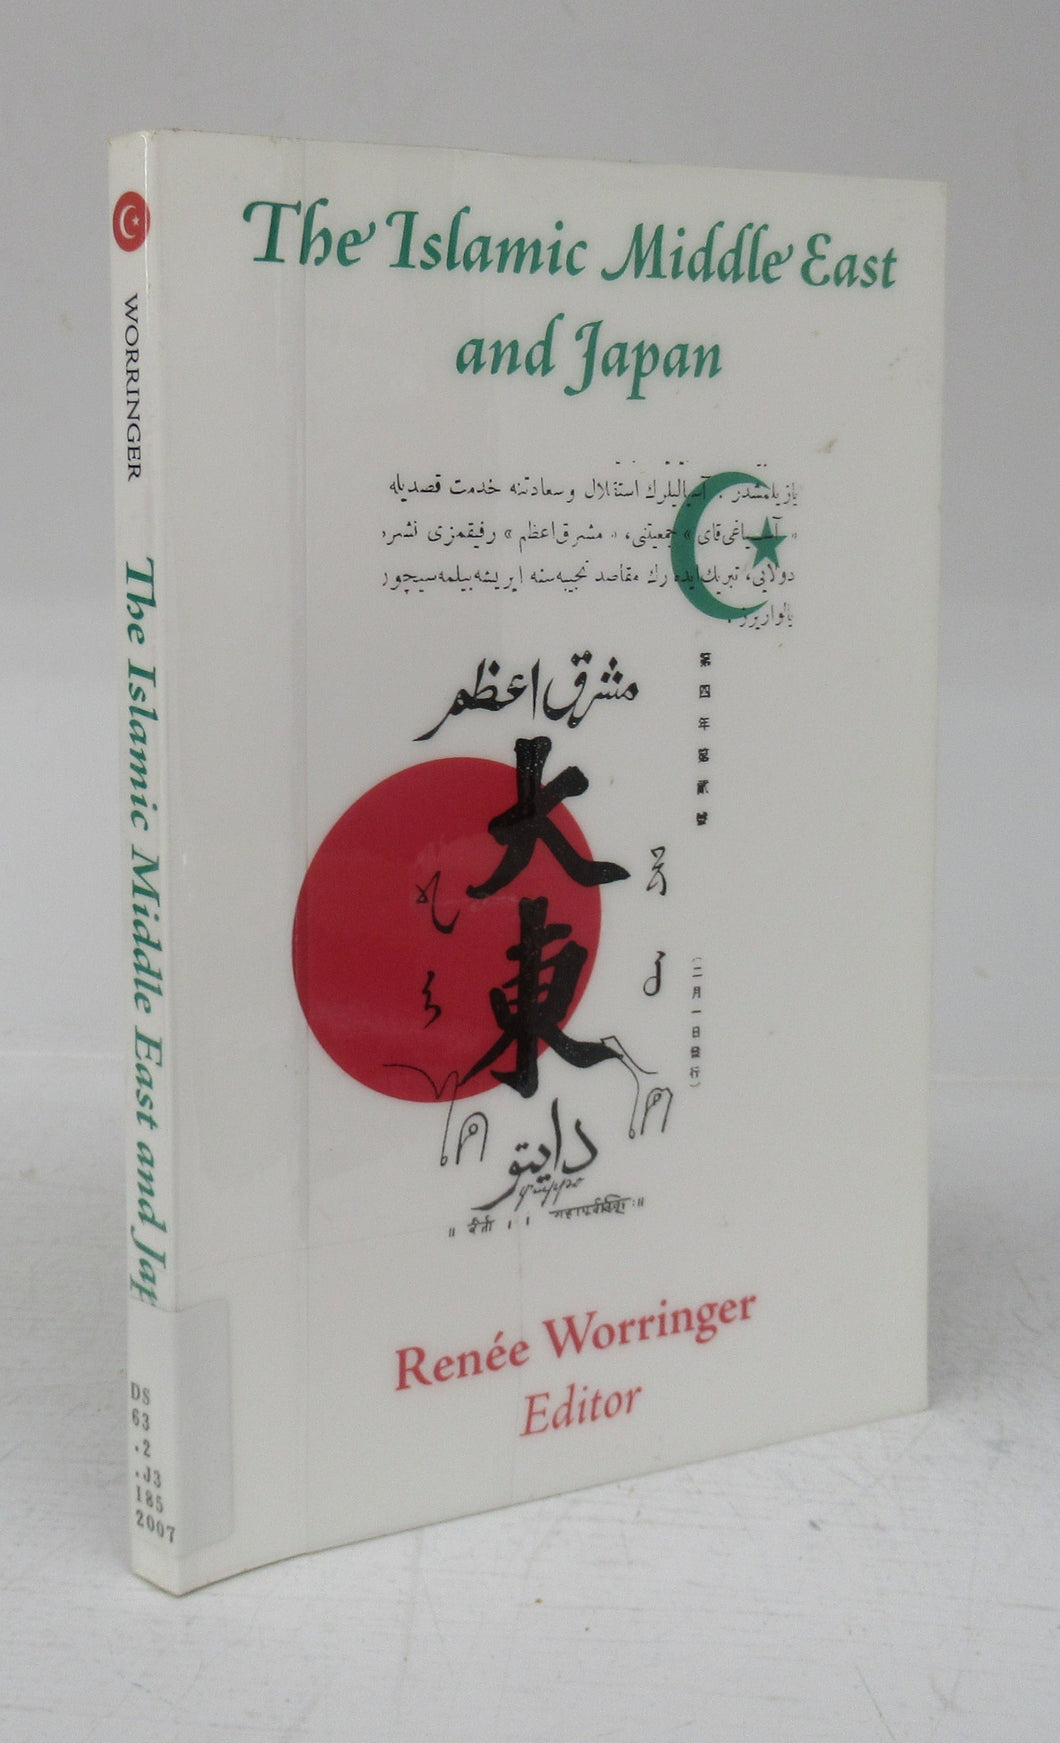 The Islamic Middle East and Japan: Perceptions, Aspirations, and the the Birth of Intra-Asian Modernity